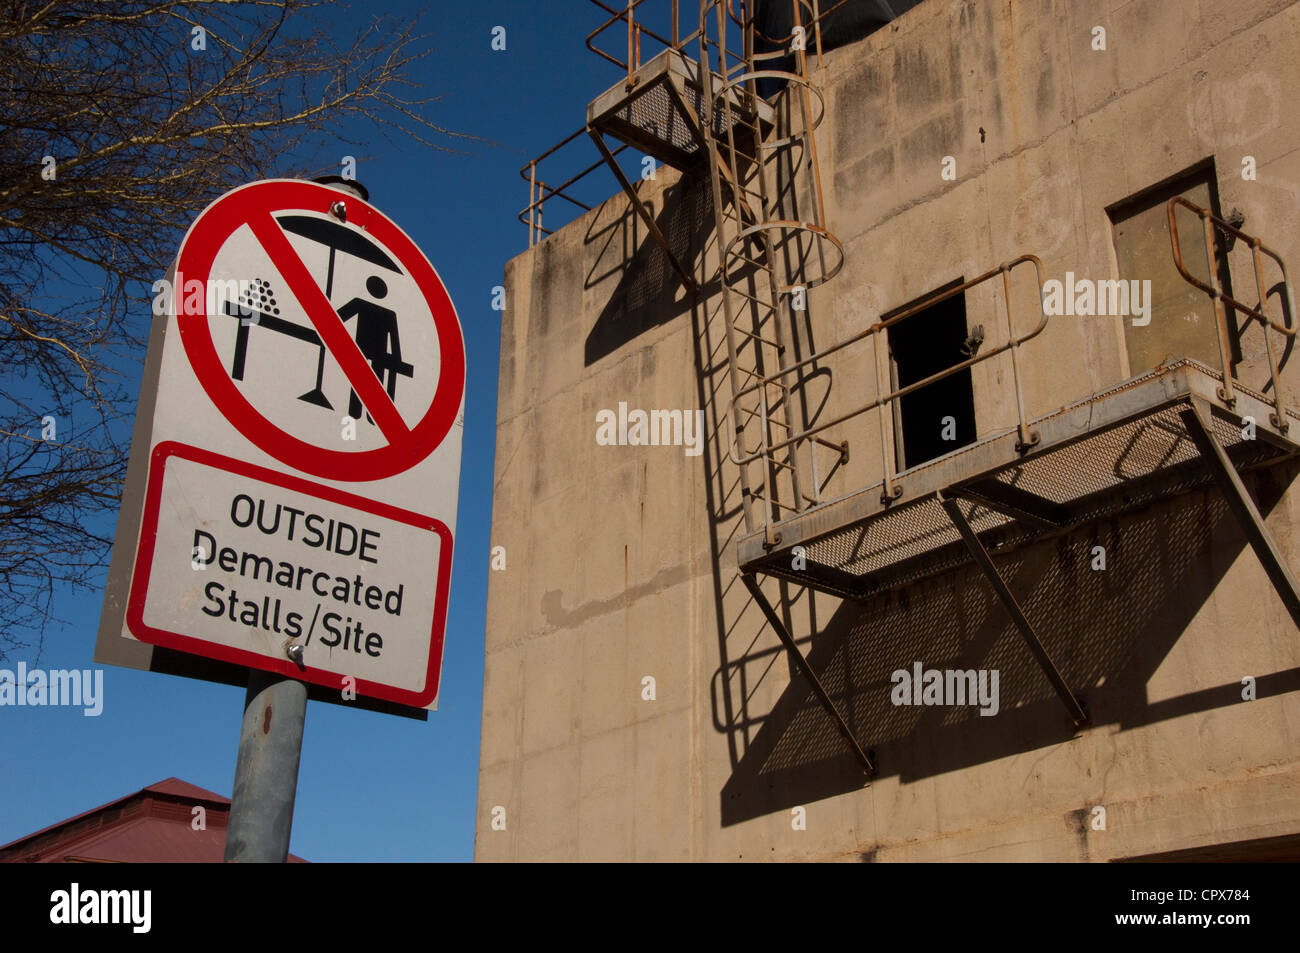 Landscape shot of a building with a no hawkers street sign outside Stock Photo